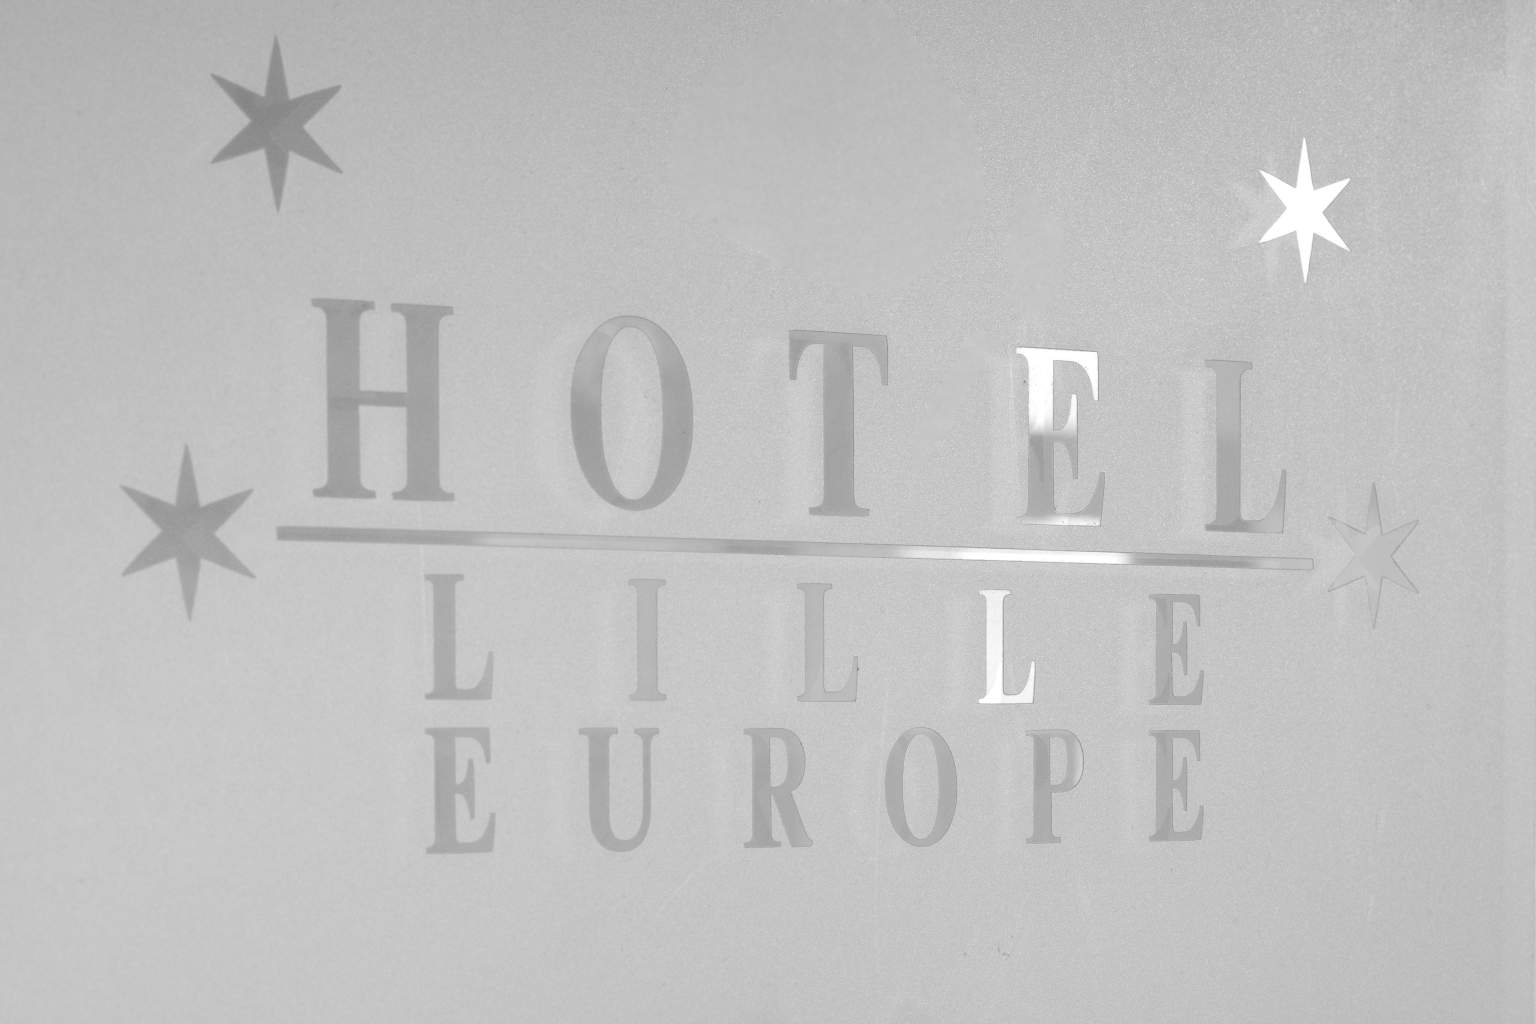 hotel lille